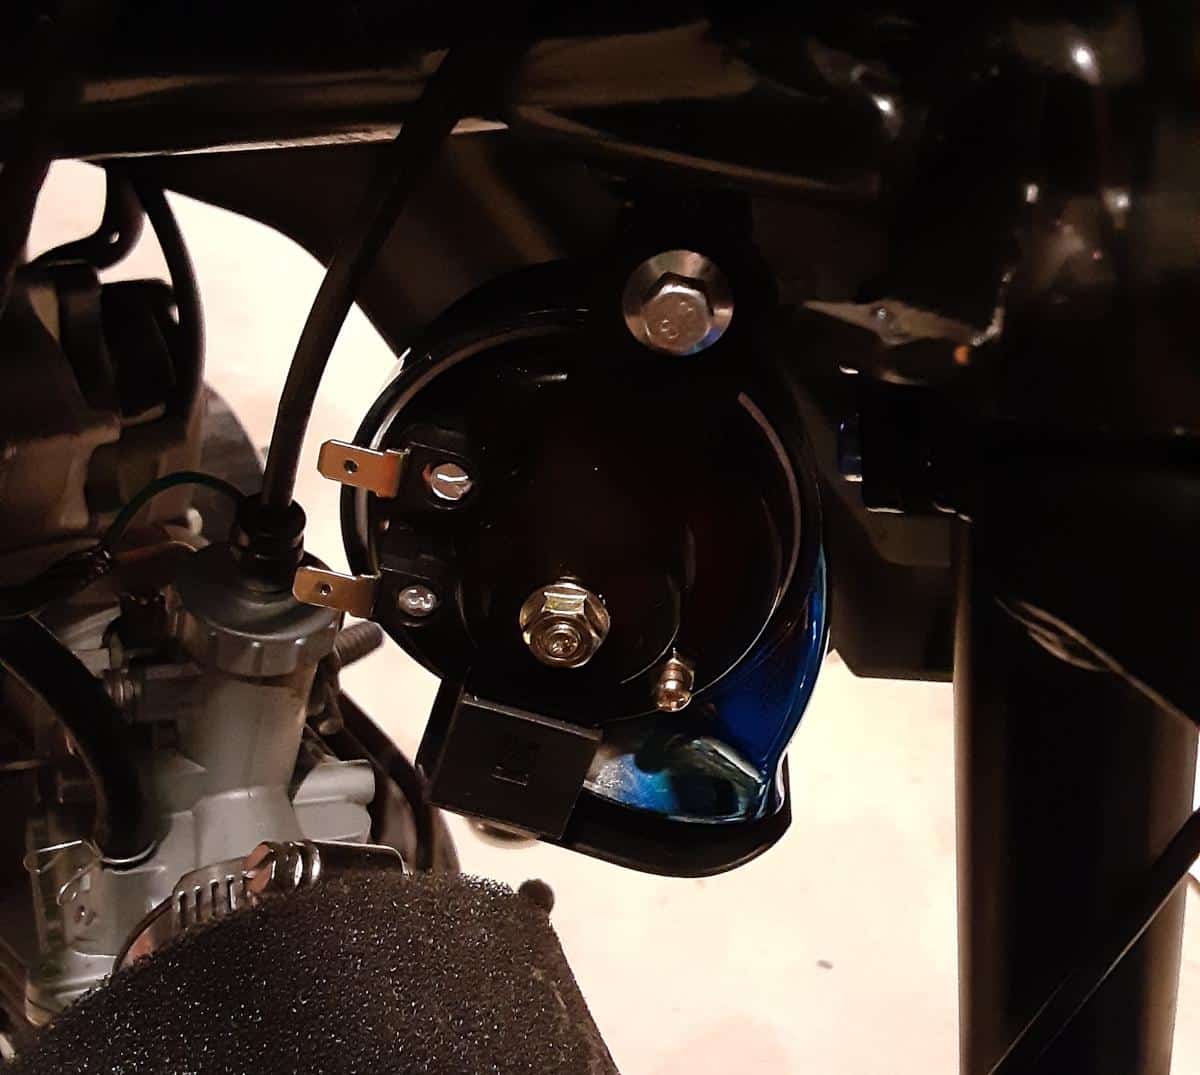 New motorcycle horn upgrade mounted to bike's frame.